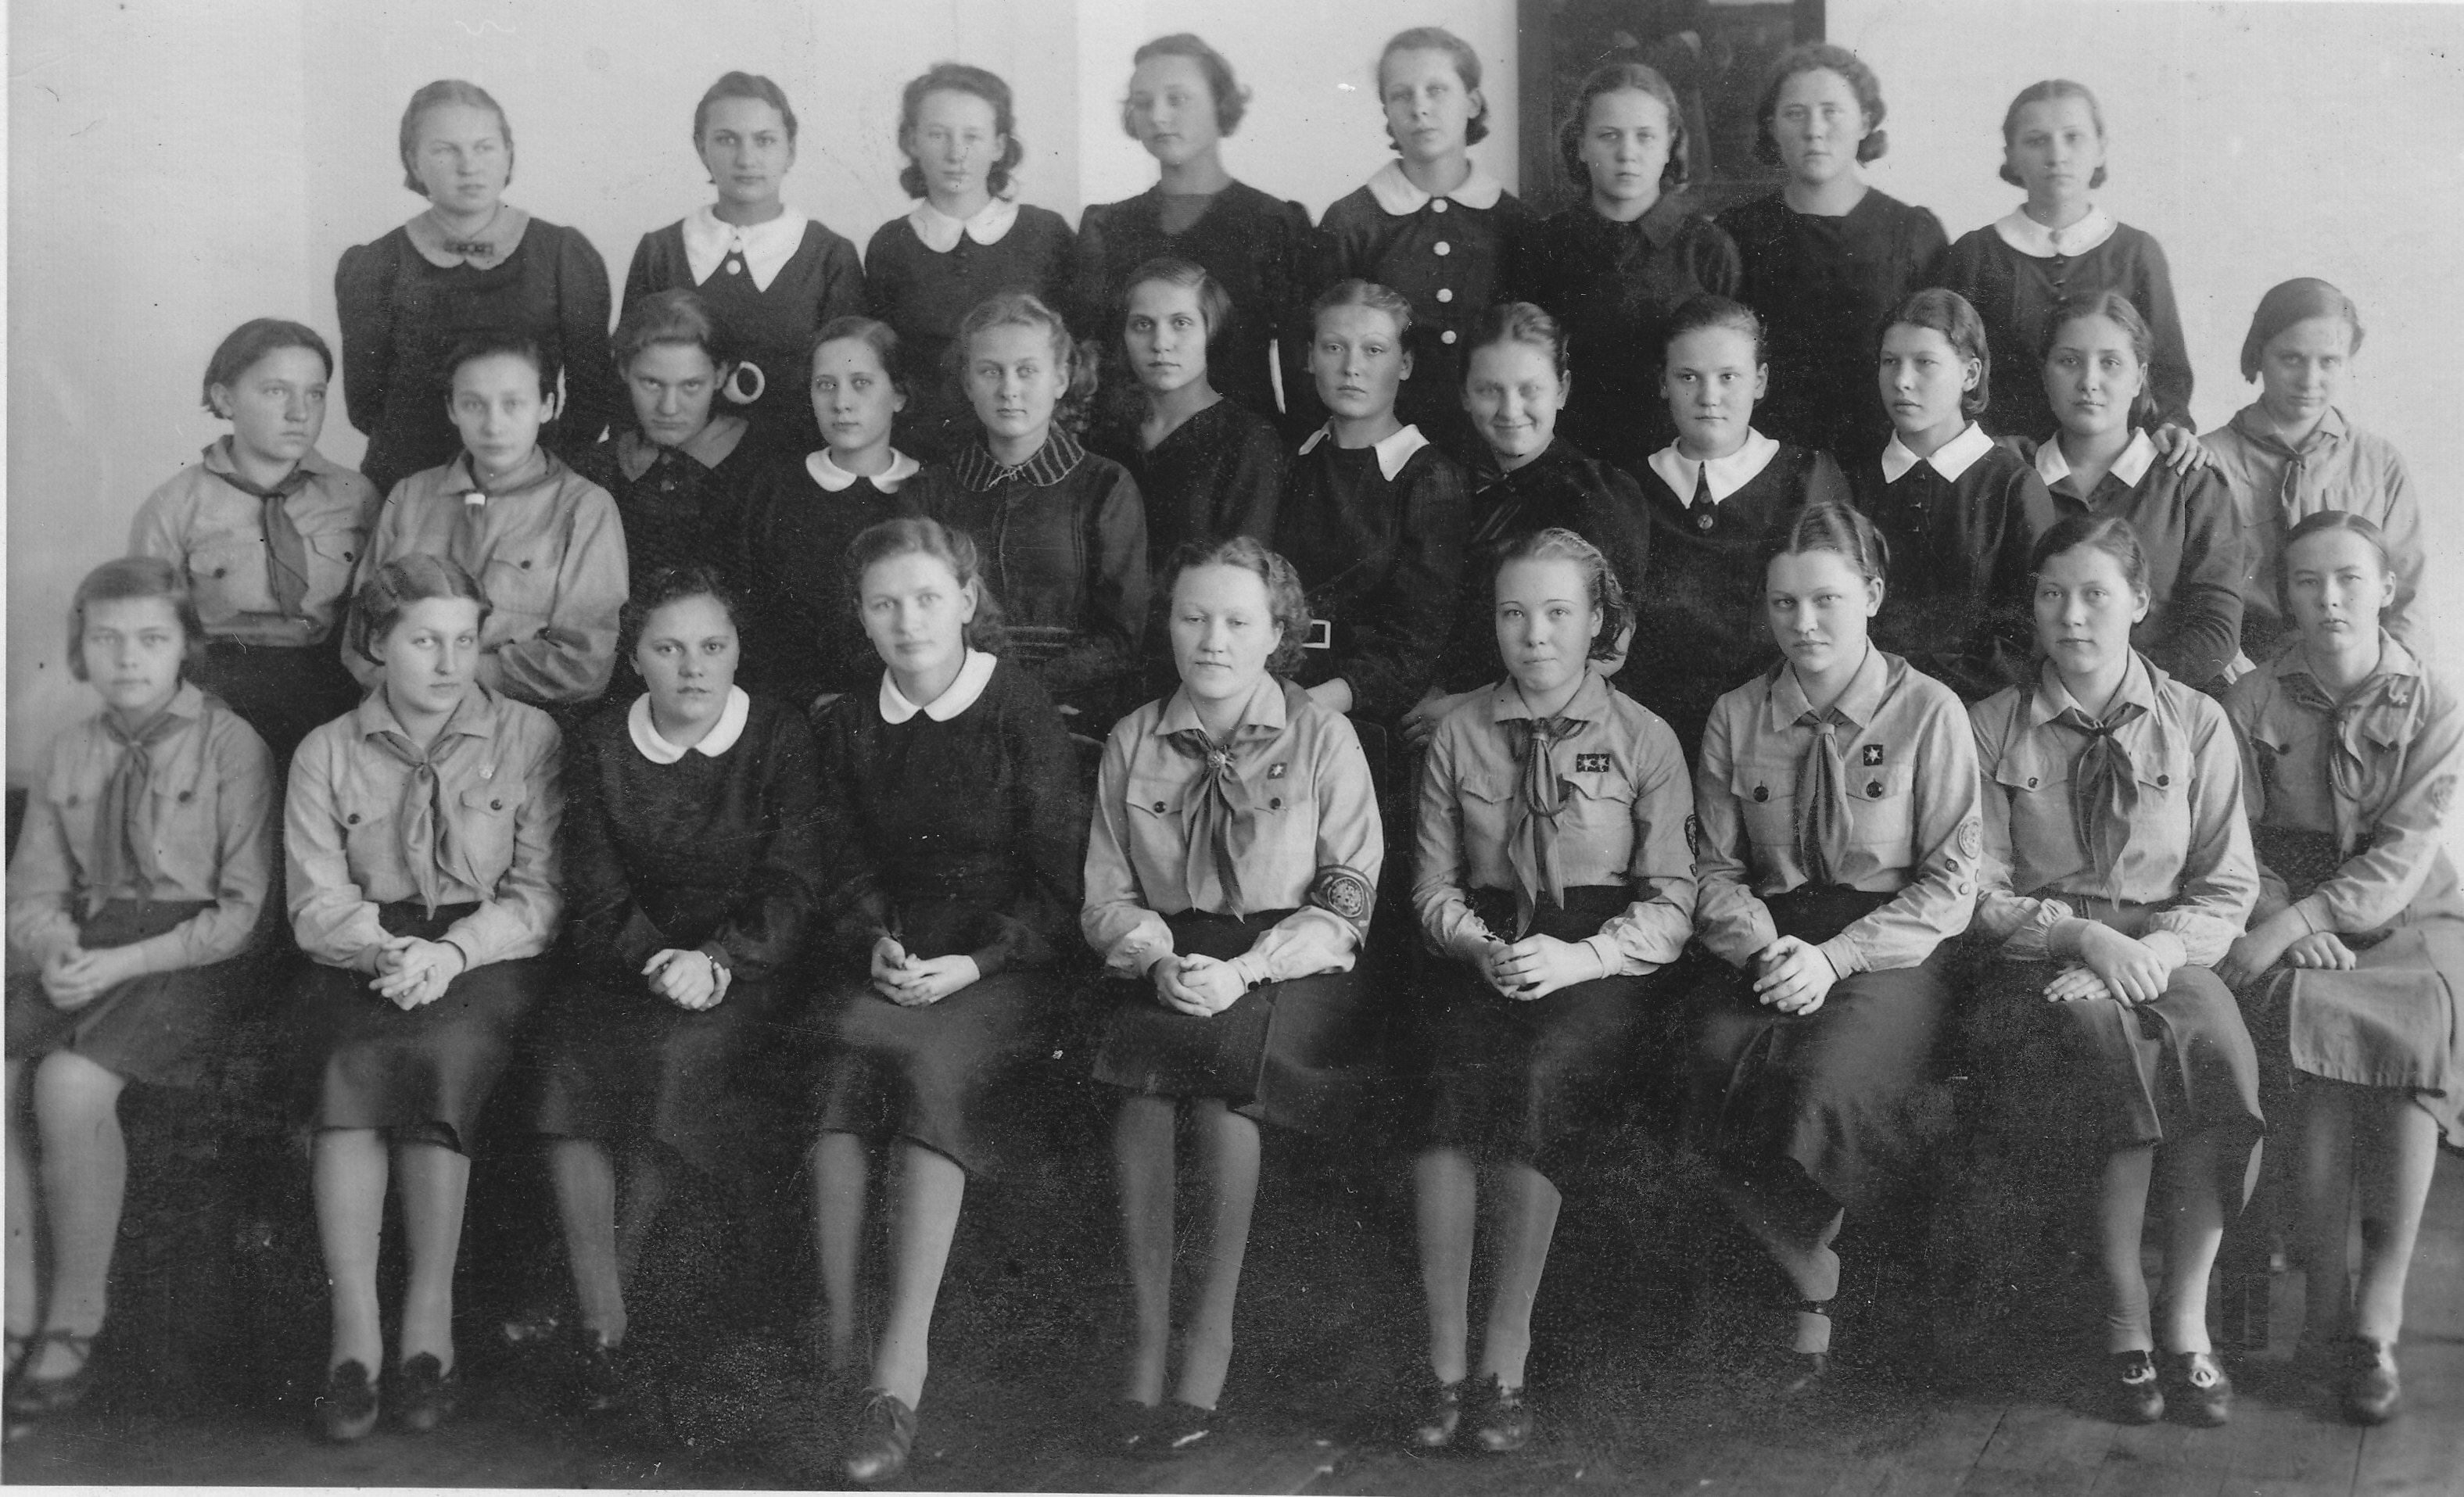 Gymnasium of the Horn 1938